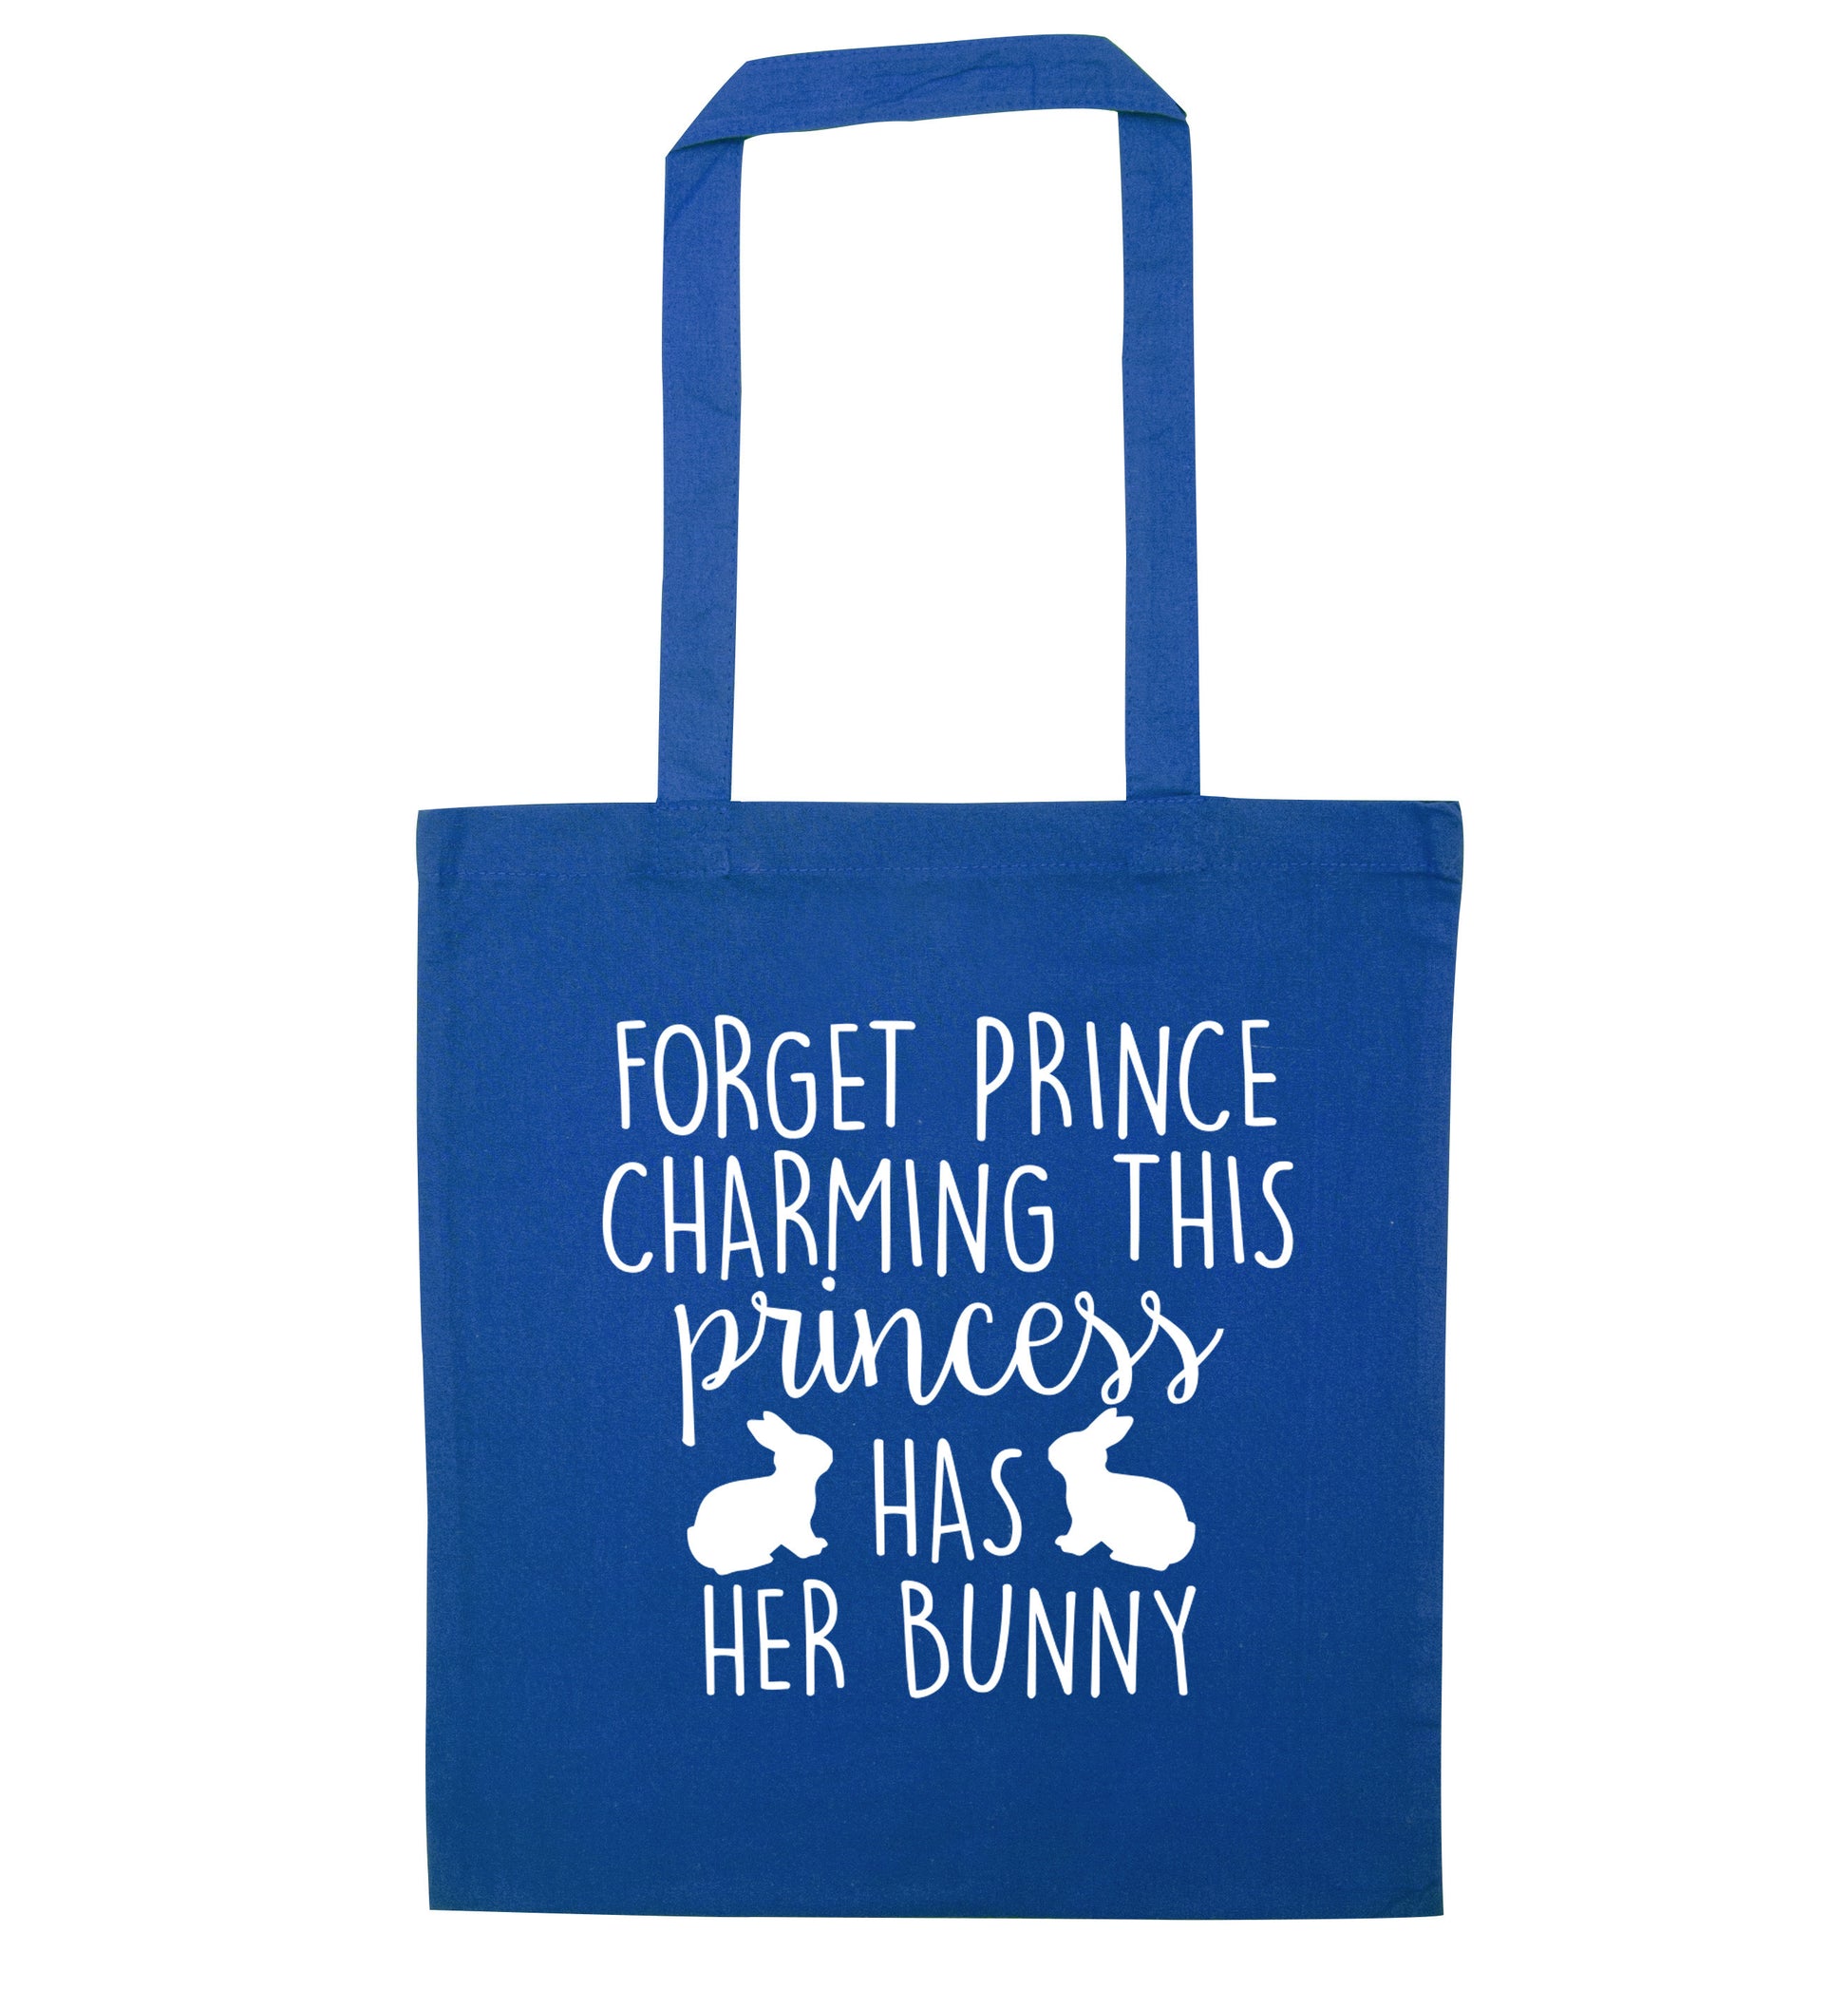 Forget prince charming this princess has her bunny blue tote bag